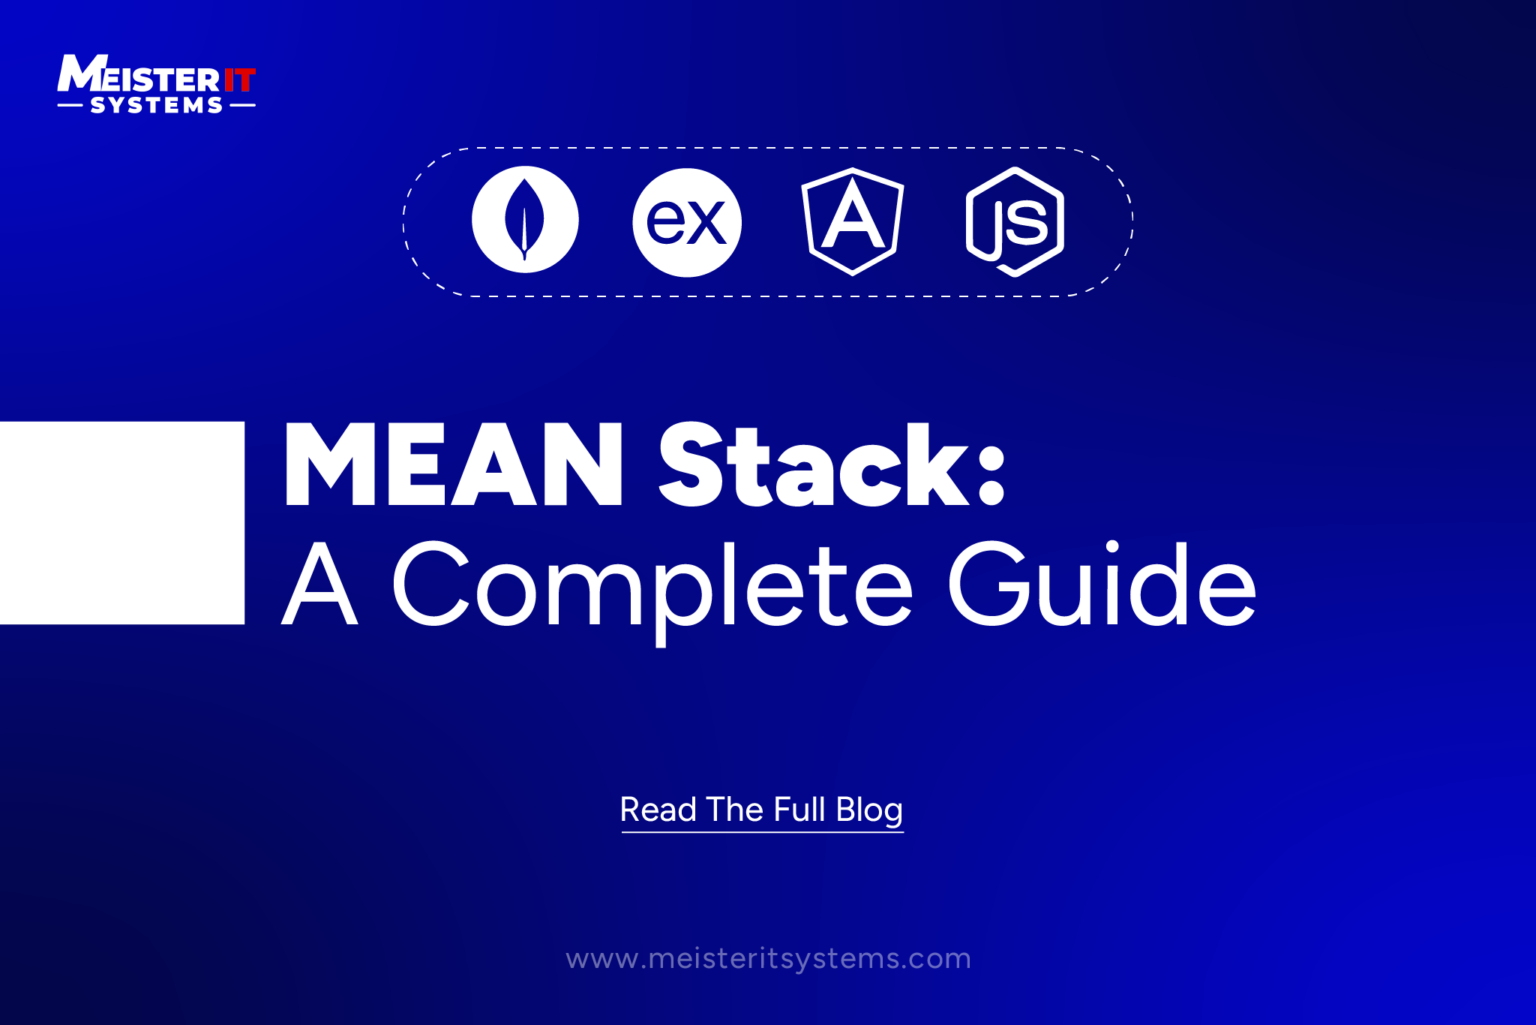 MEAN Stack: A Complete Guide